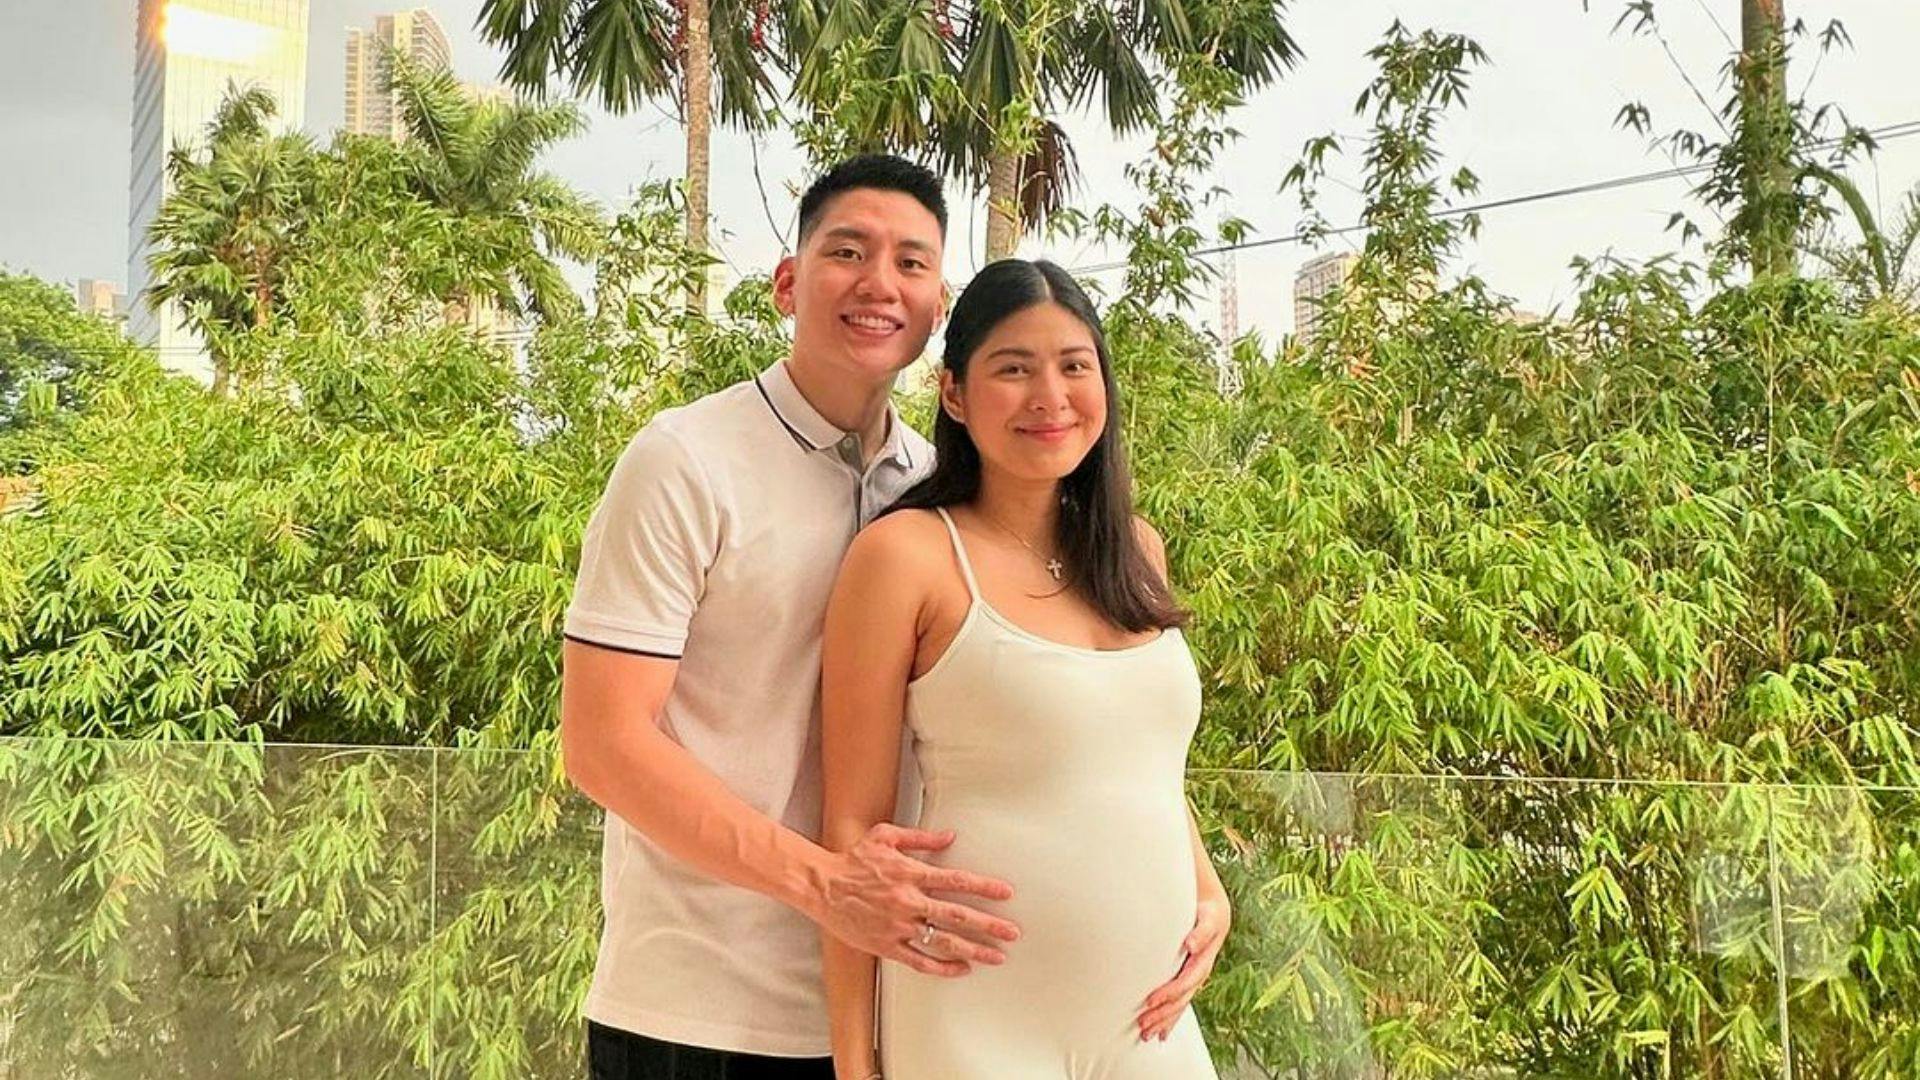 Extra motivation: SMB’s Jeron Teng announces pregnancy of wife Jeanine ahead of PBA Finals